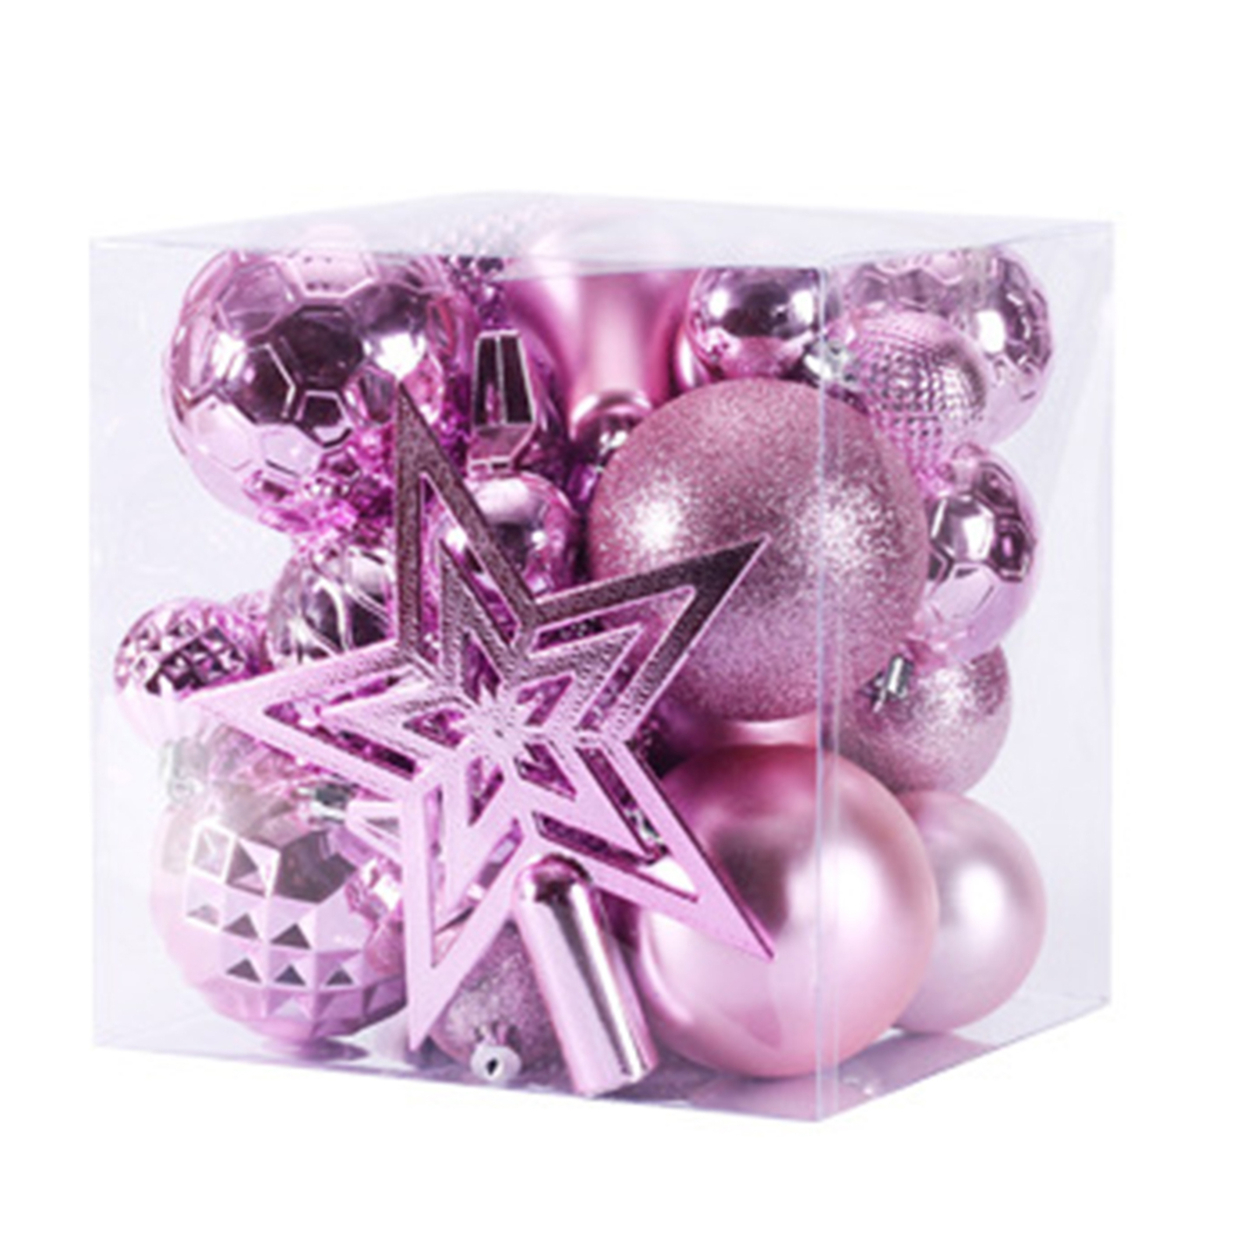 45Pcs/Set Bauble Decor Exquisite Workmanship Shatterproof Plastic Christmas Tree Colorfast Hanging Ball Ornament for Home - pink